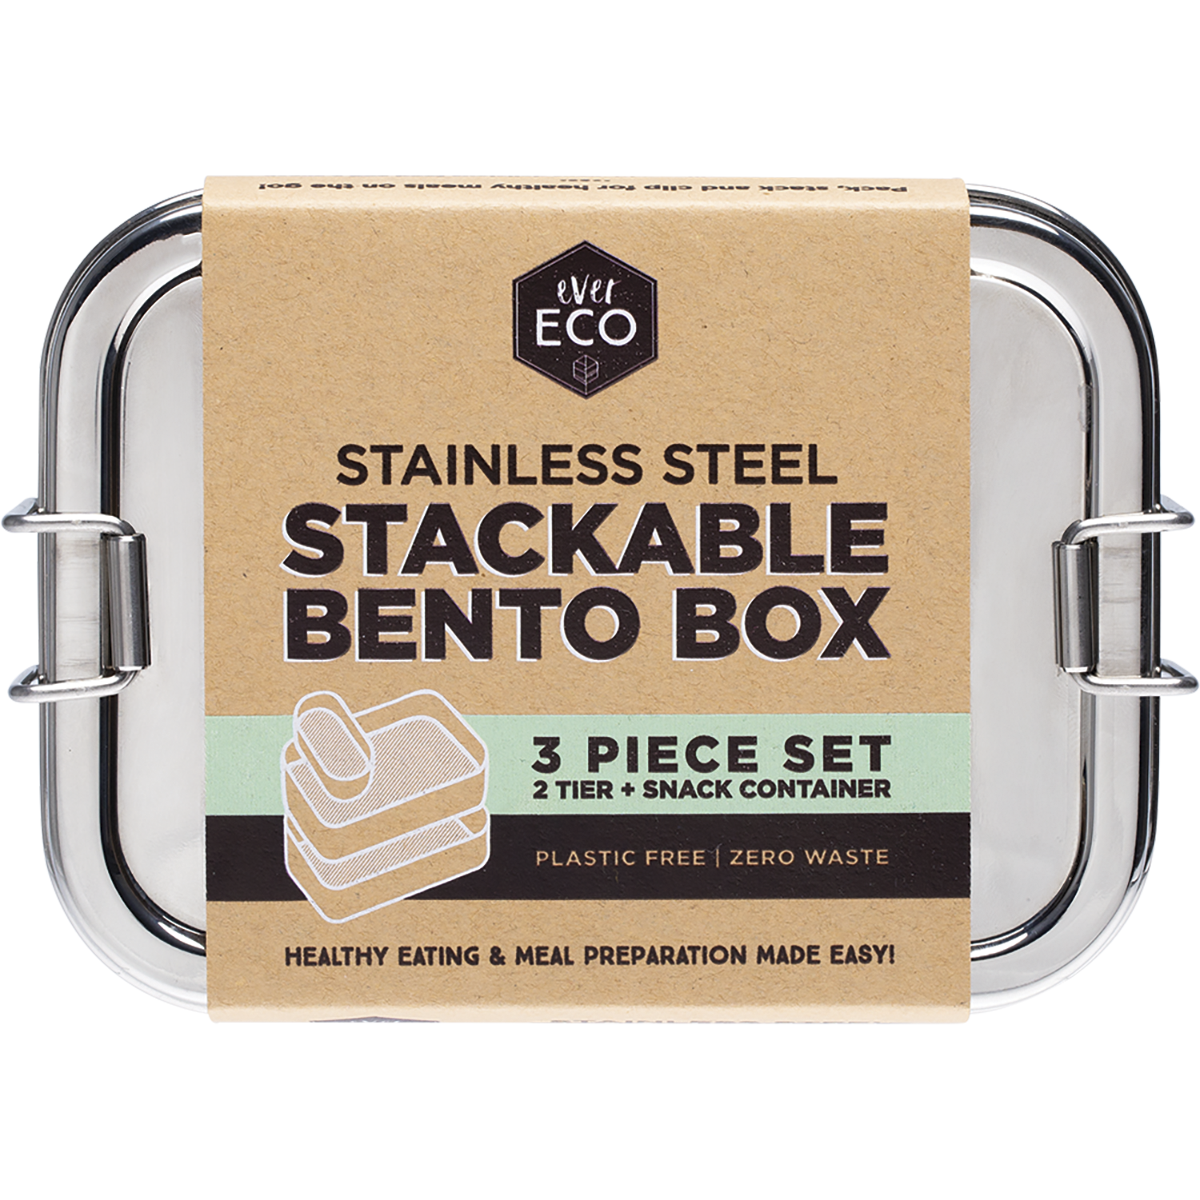 Ever-Eco-Stainless-Steel-Stackable-Bento-Box-3-Piece-Set